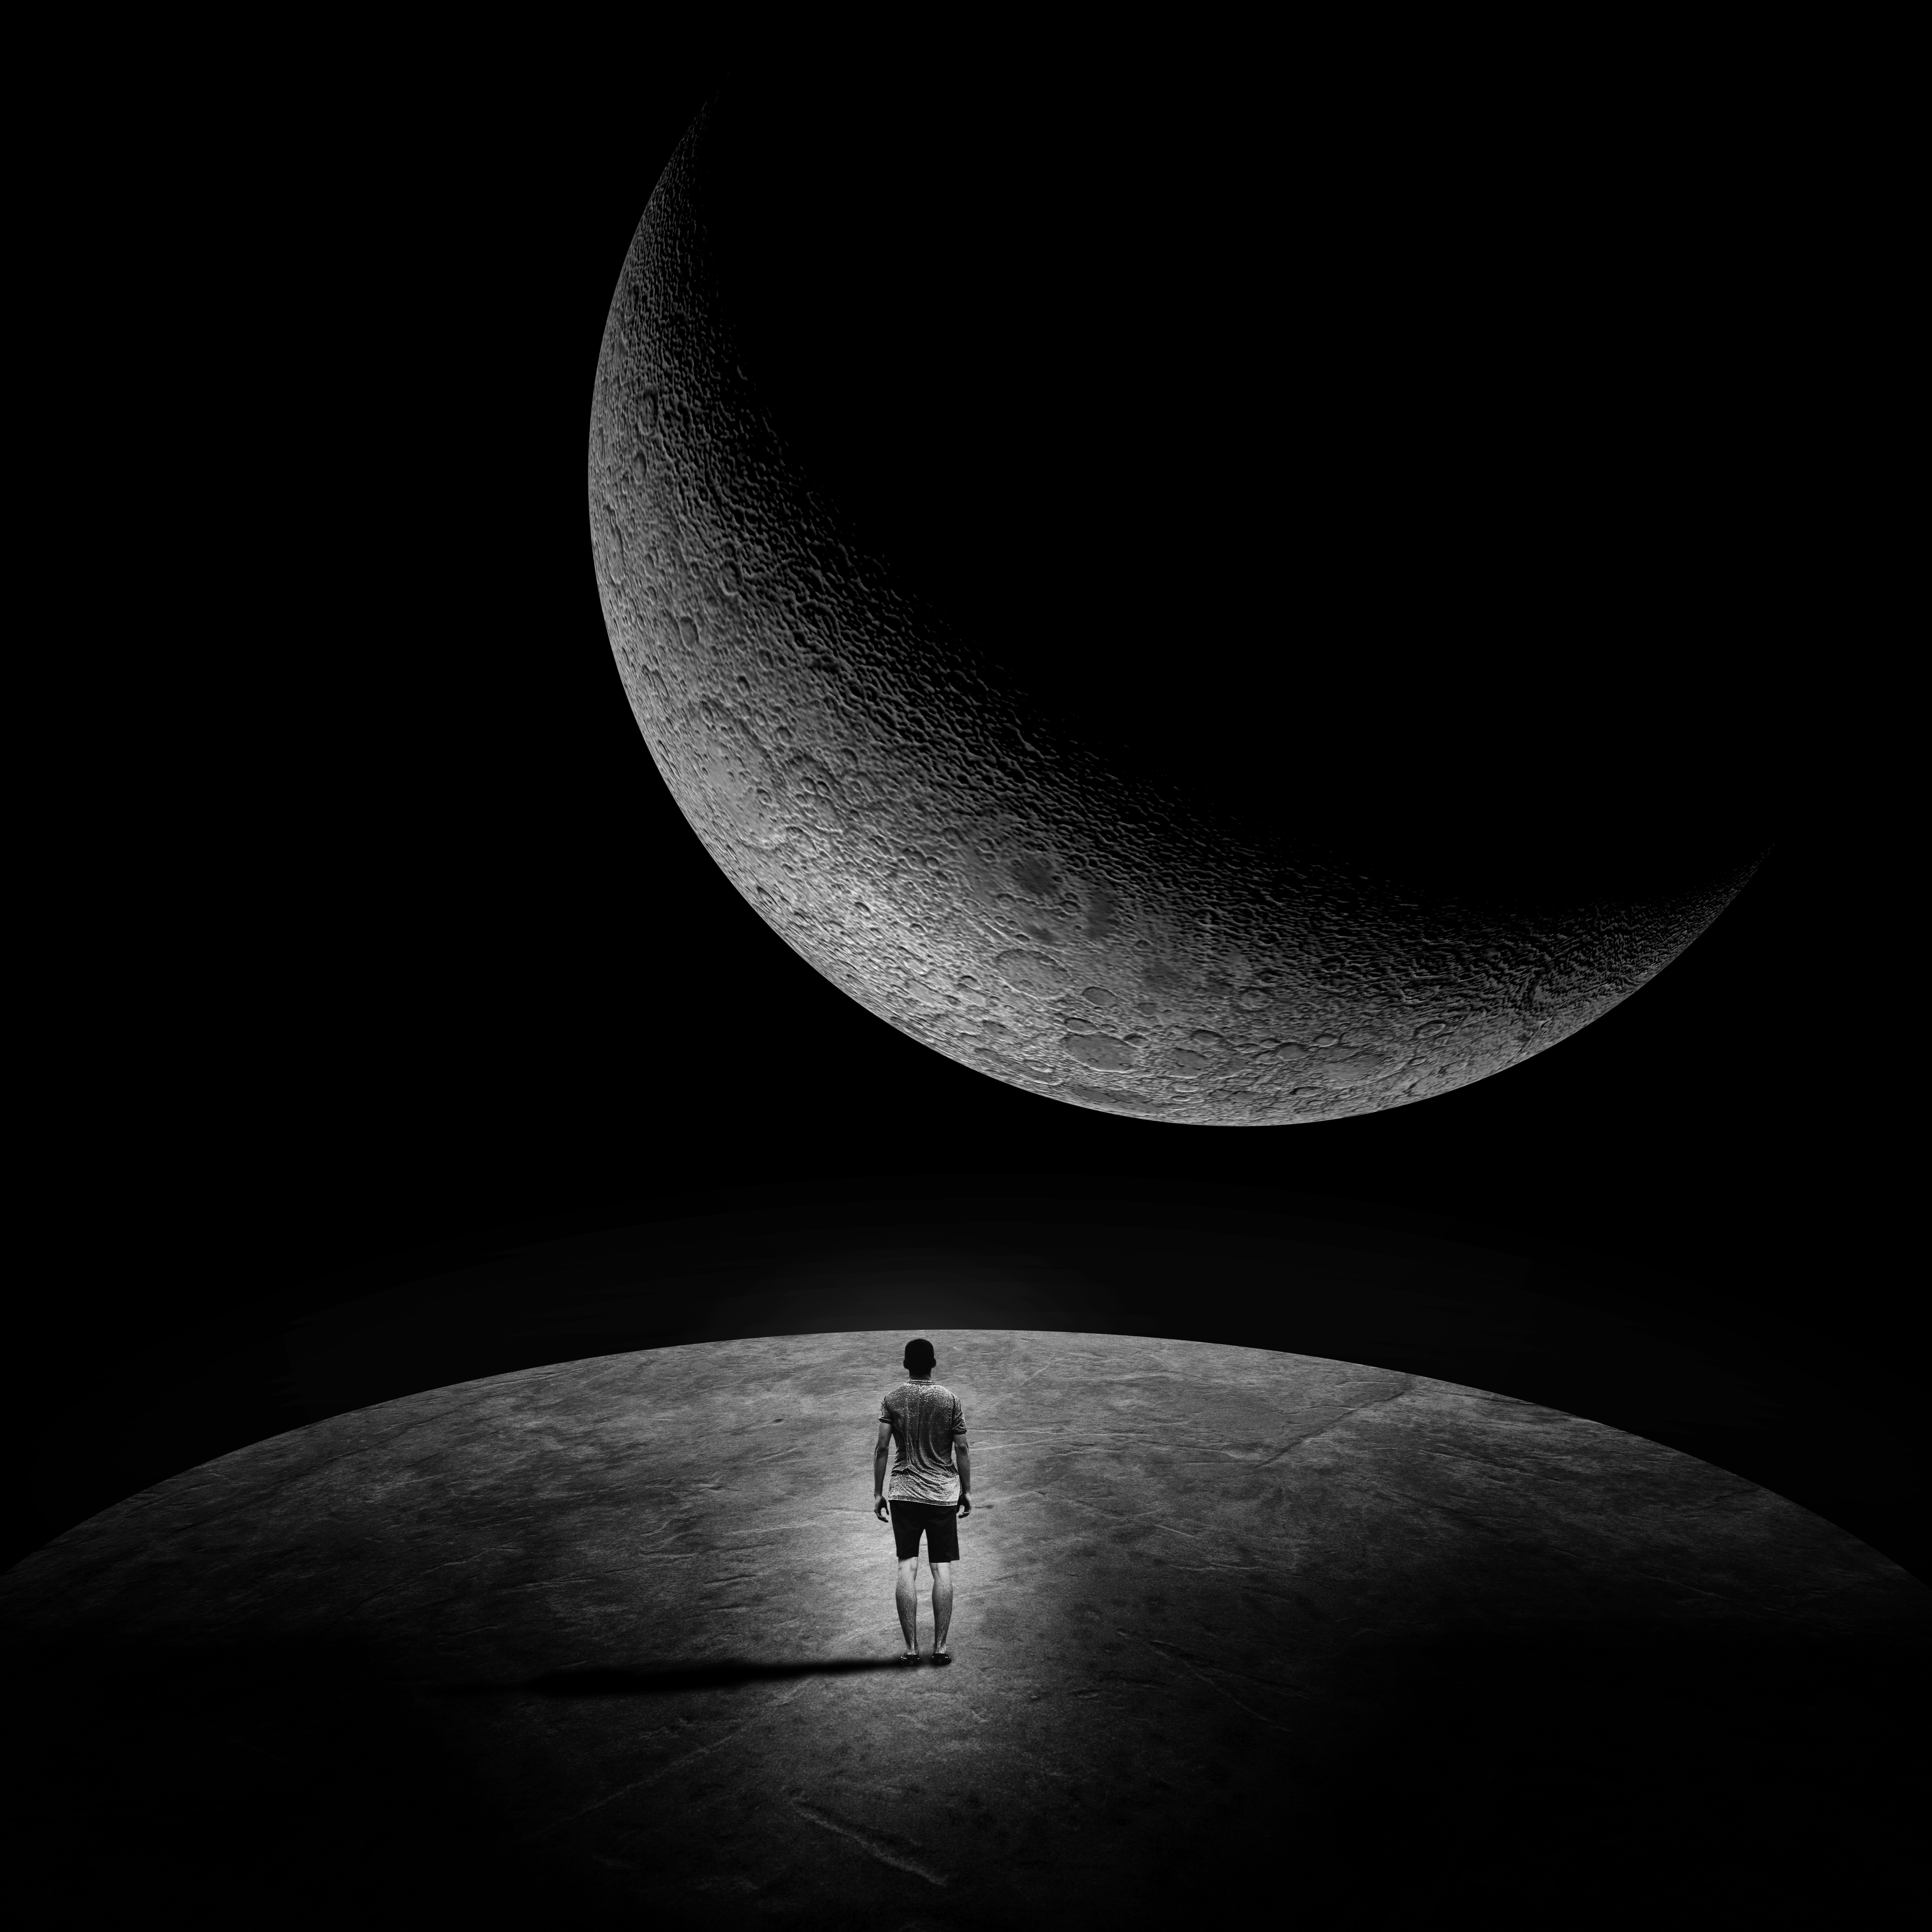 human, space, loneliness, black and white, moon, cosmic, black, dark, extraterrestrial, person